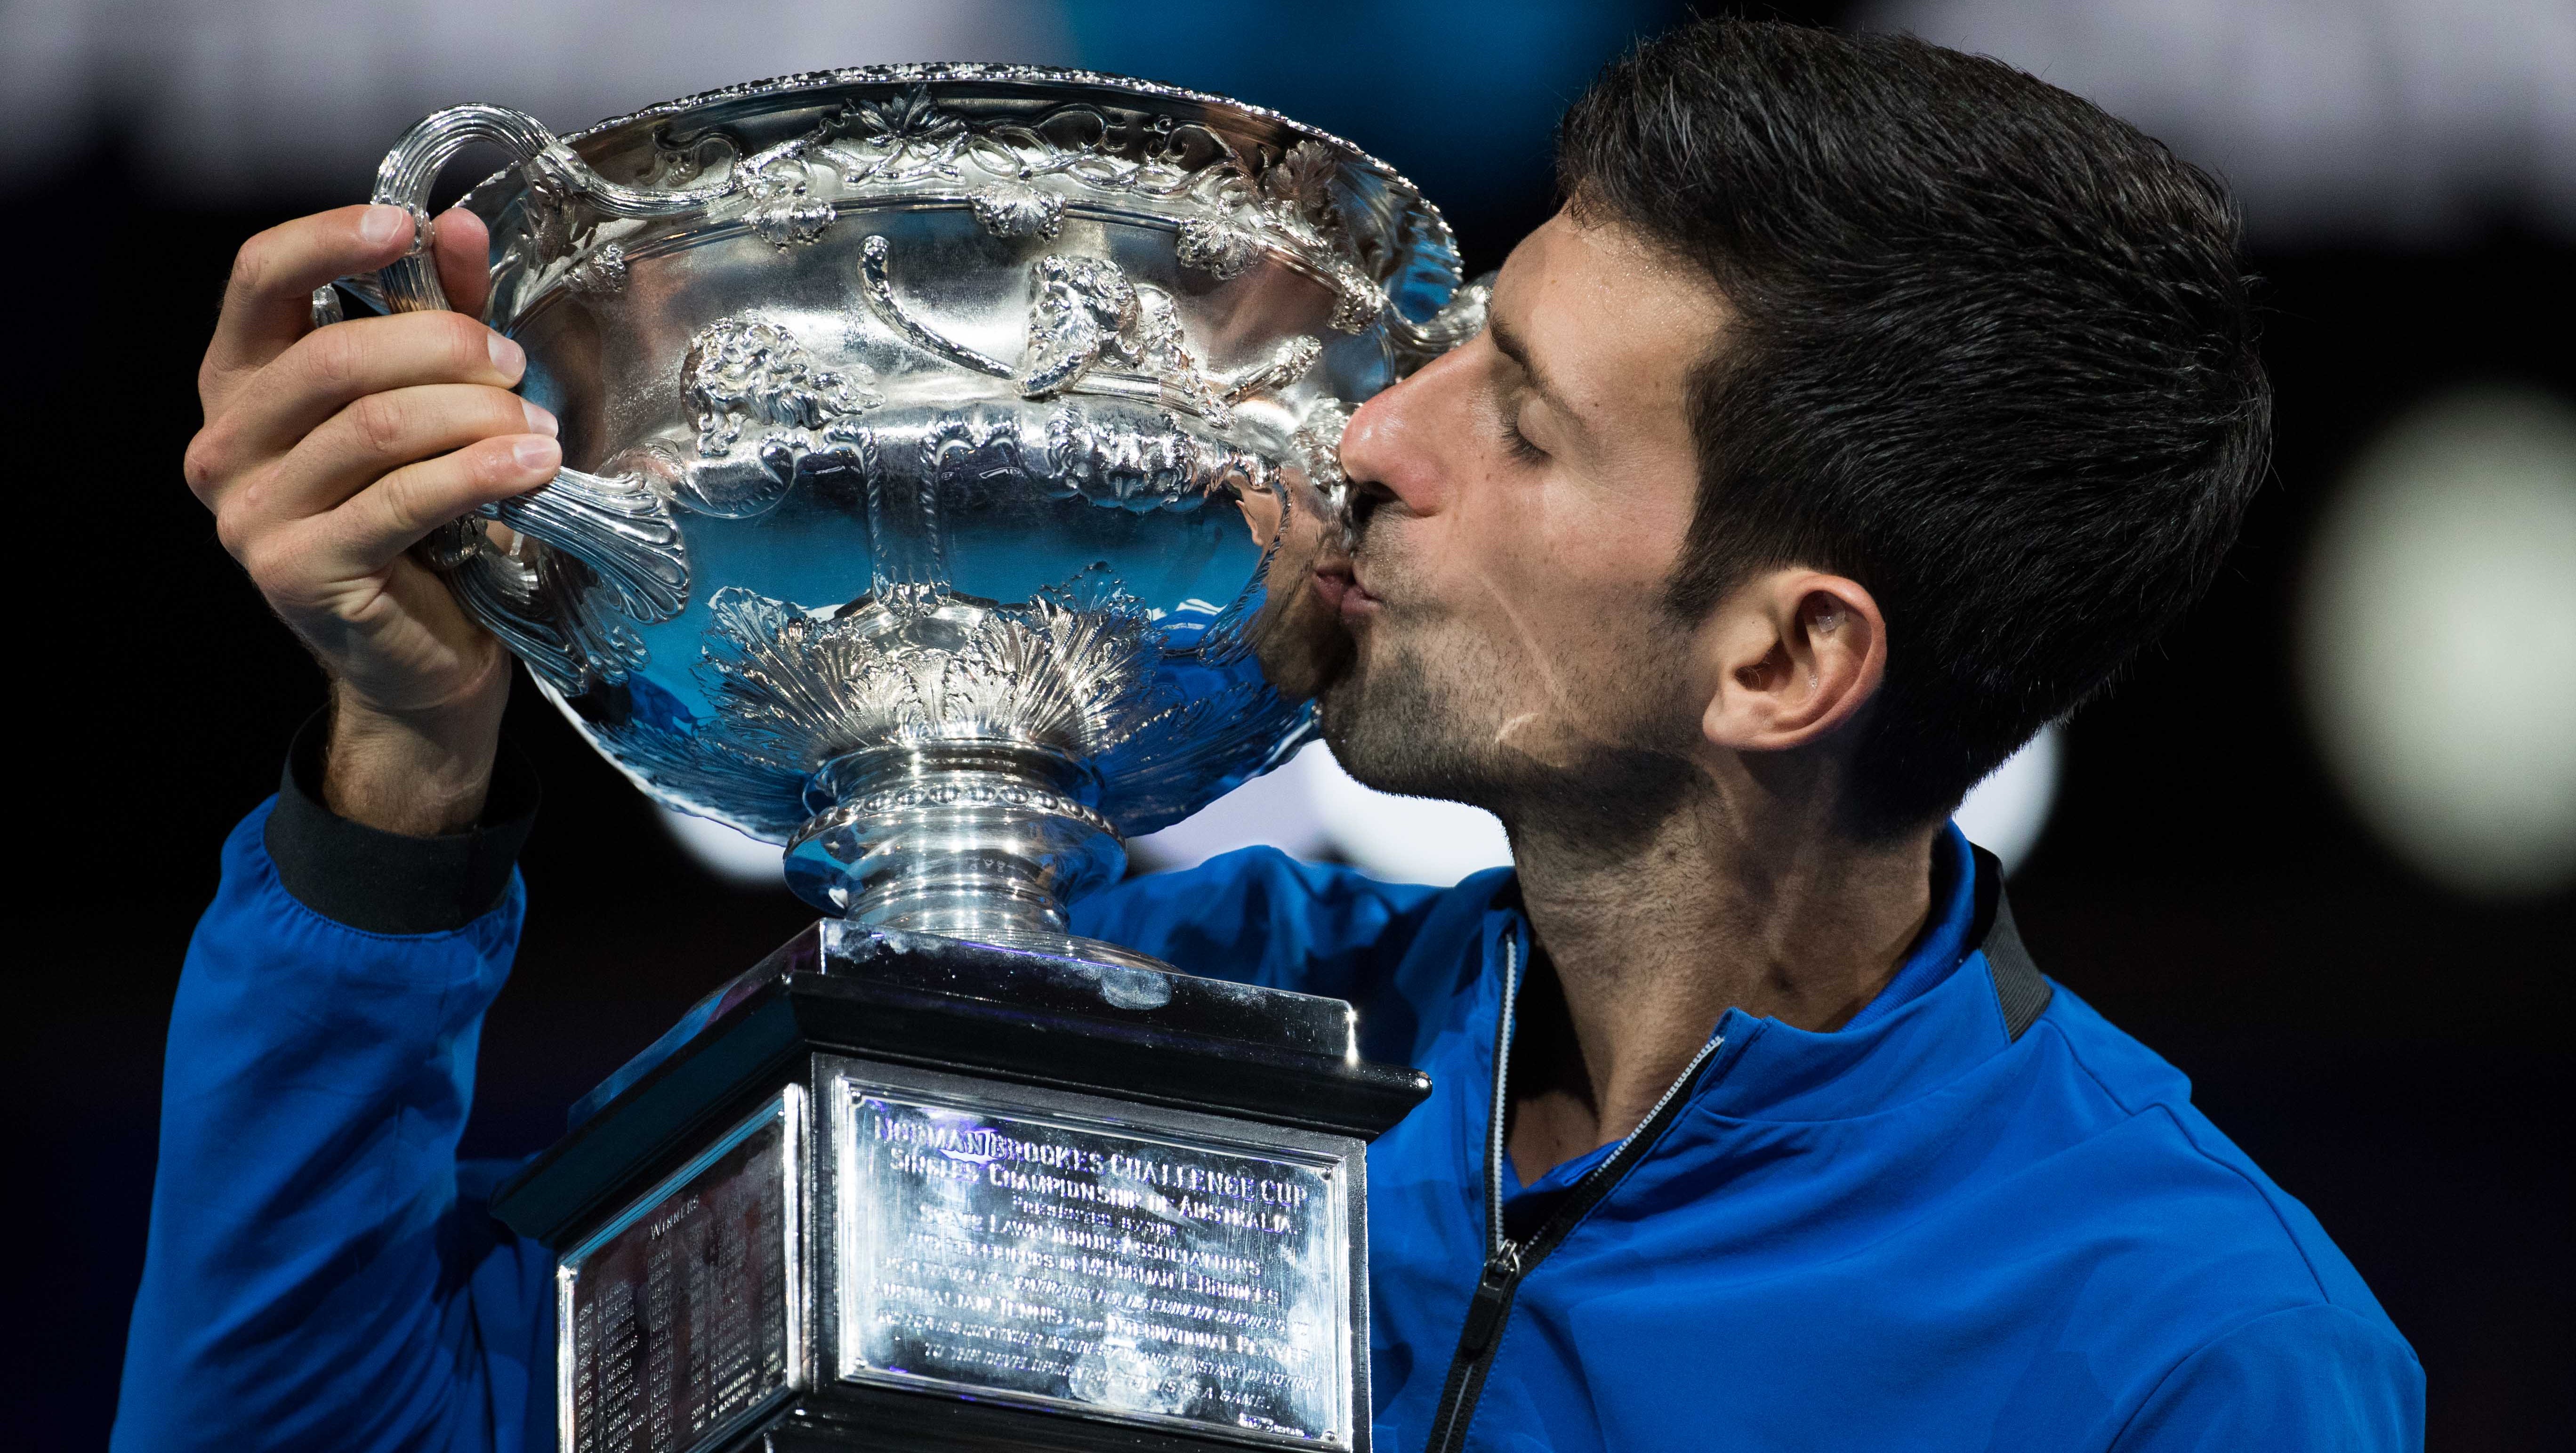 Sports News Roundup: Fed Cup title; Djokovic thrashes Berrettini and more